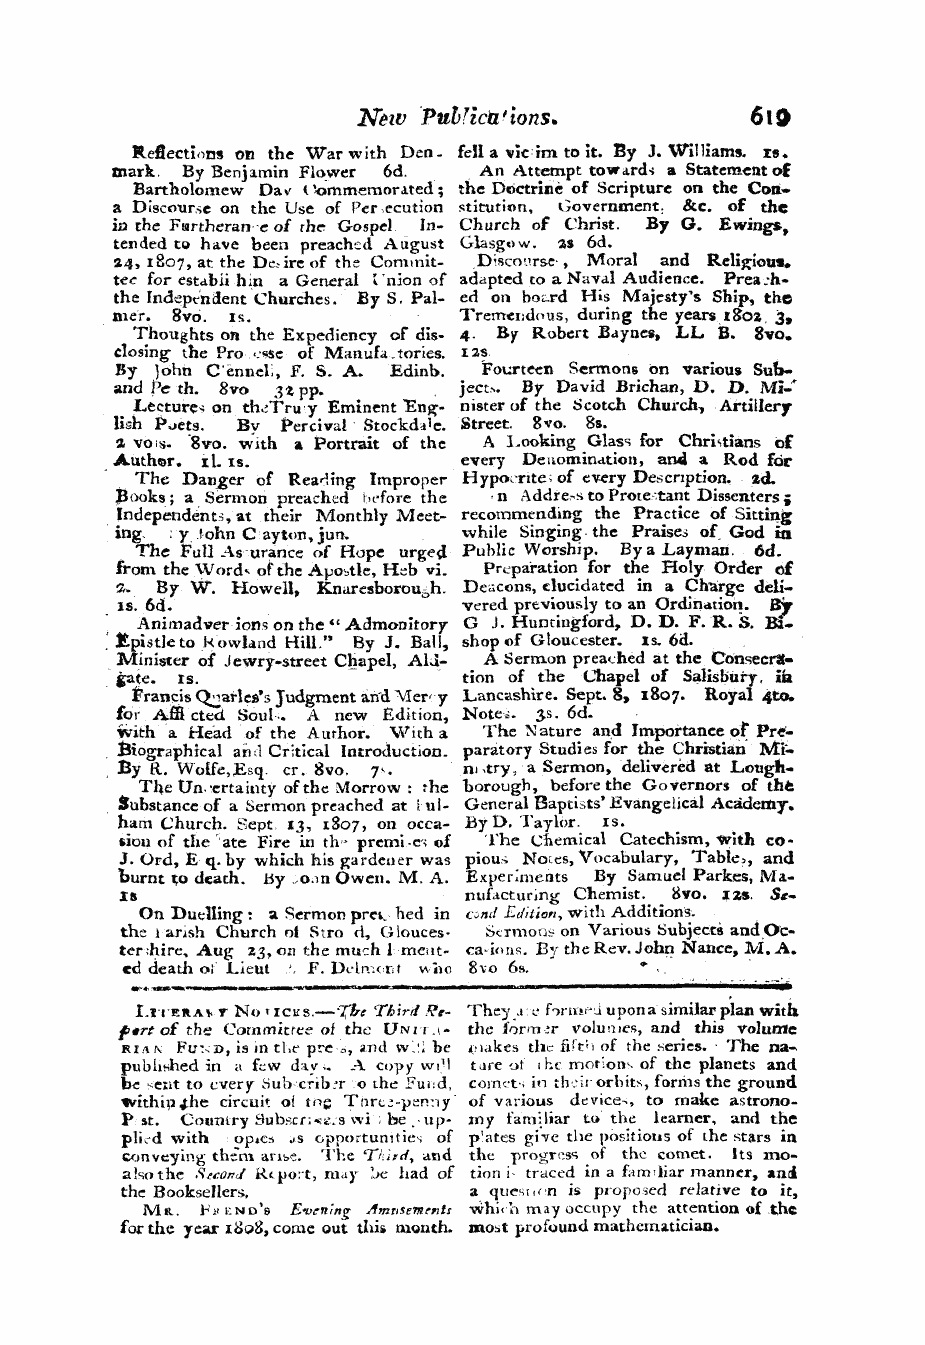 Monthly Repository (1806-1838) and Unitarian Chronicle (1832-1833): F Y, 1st edition: 55